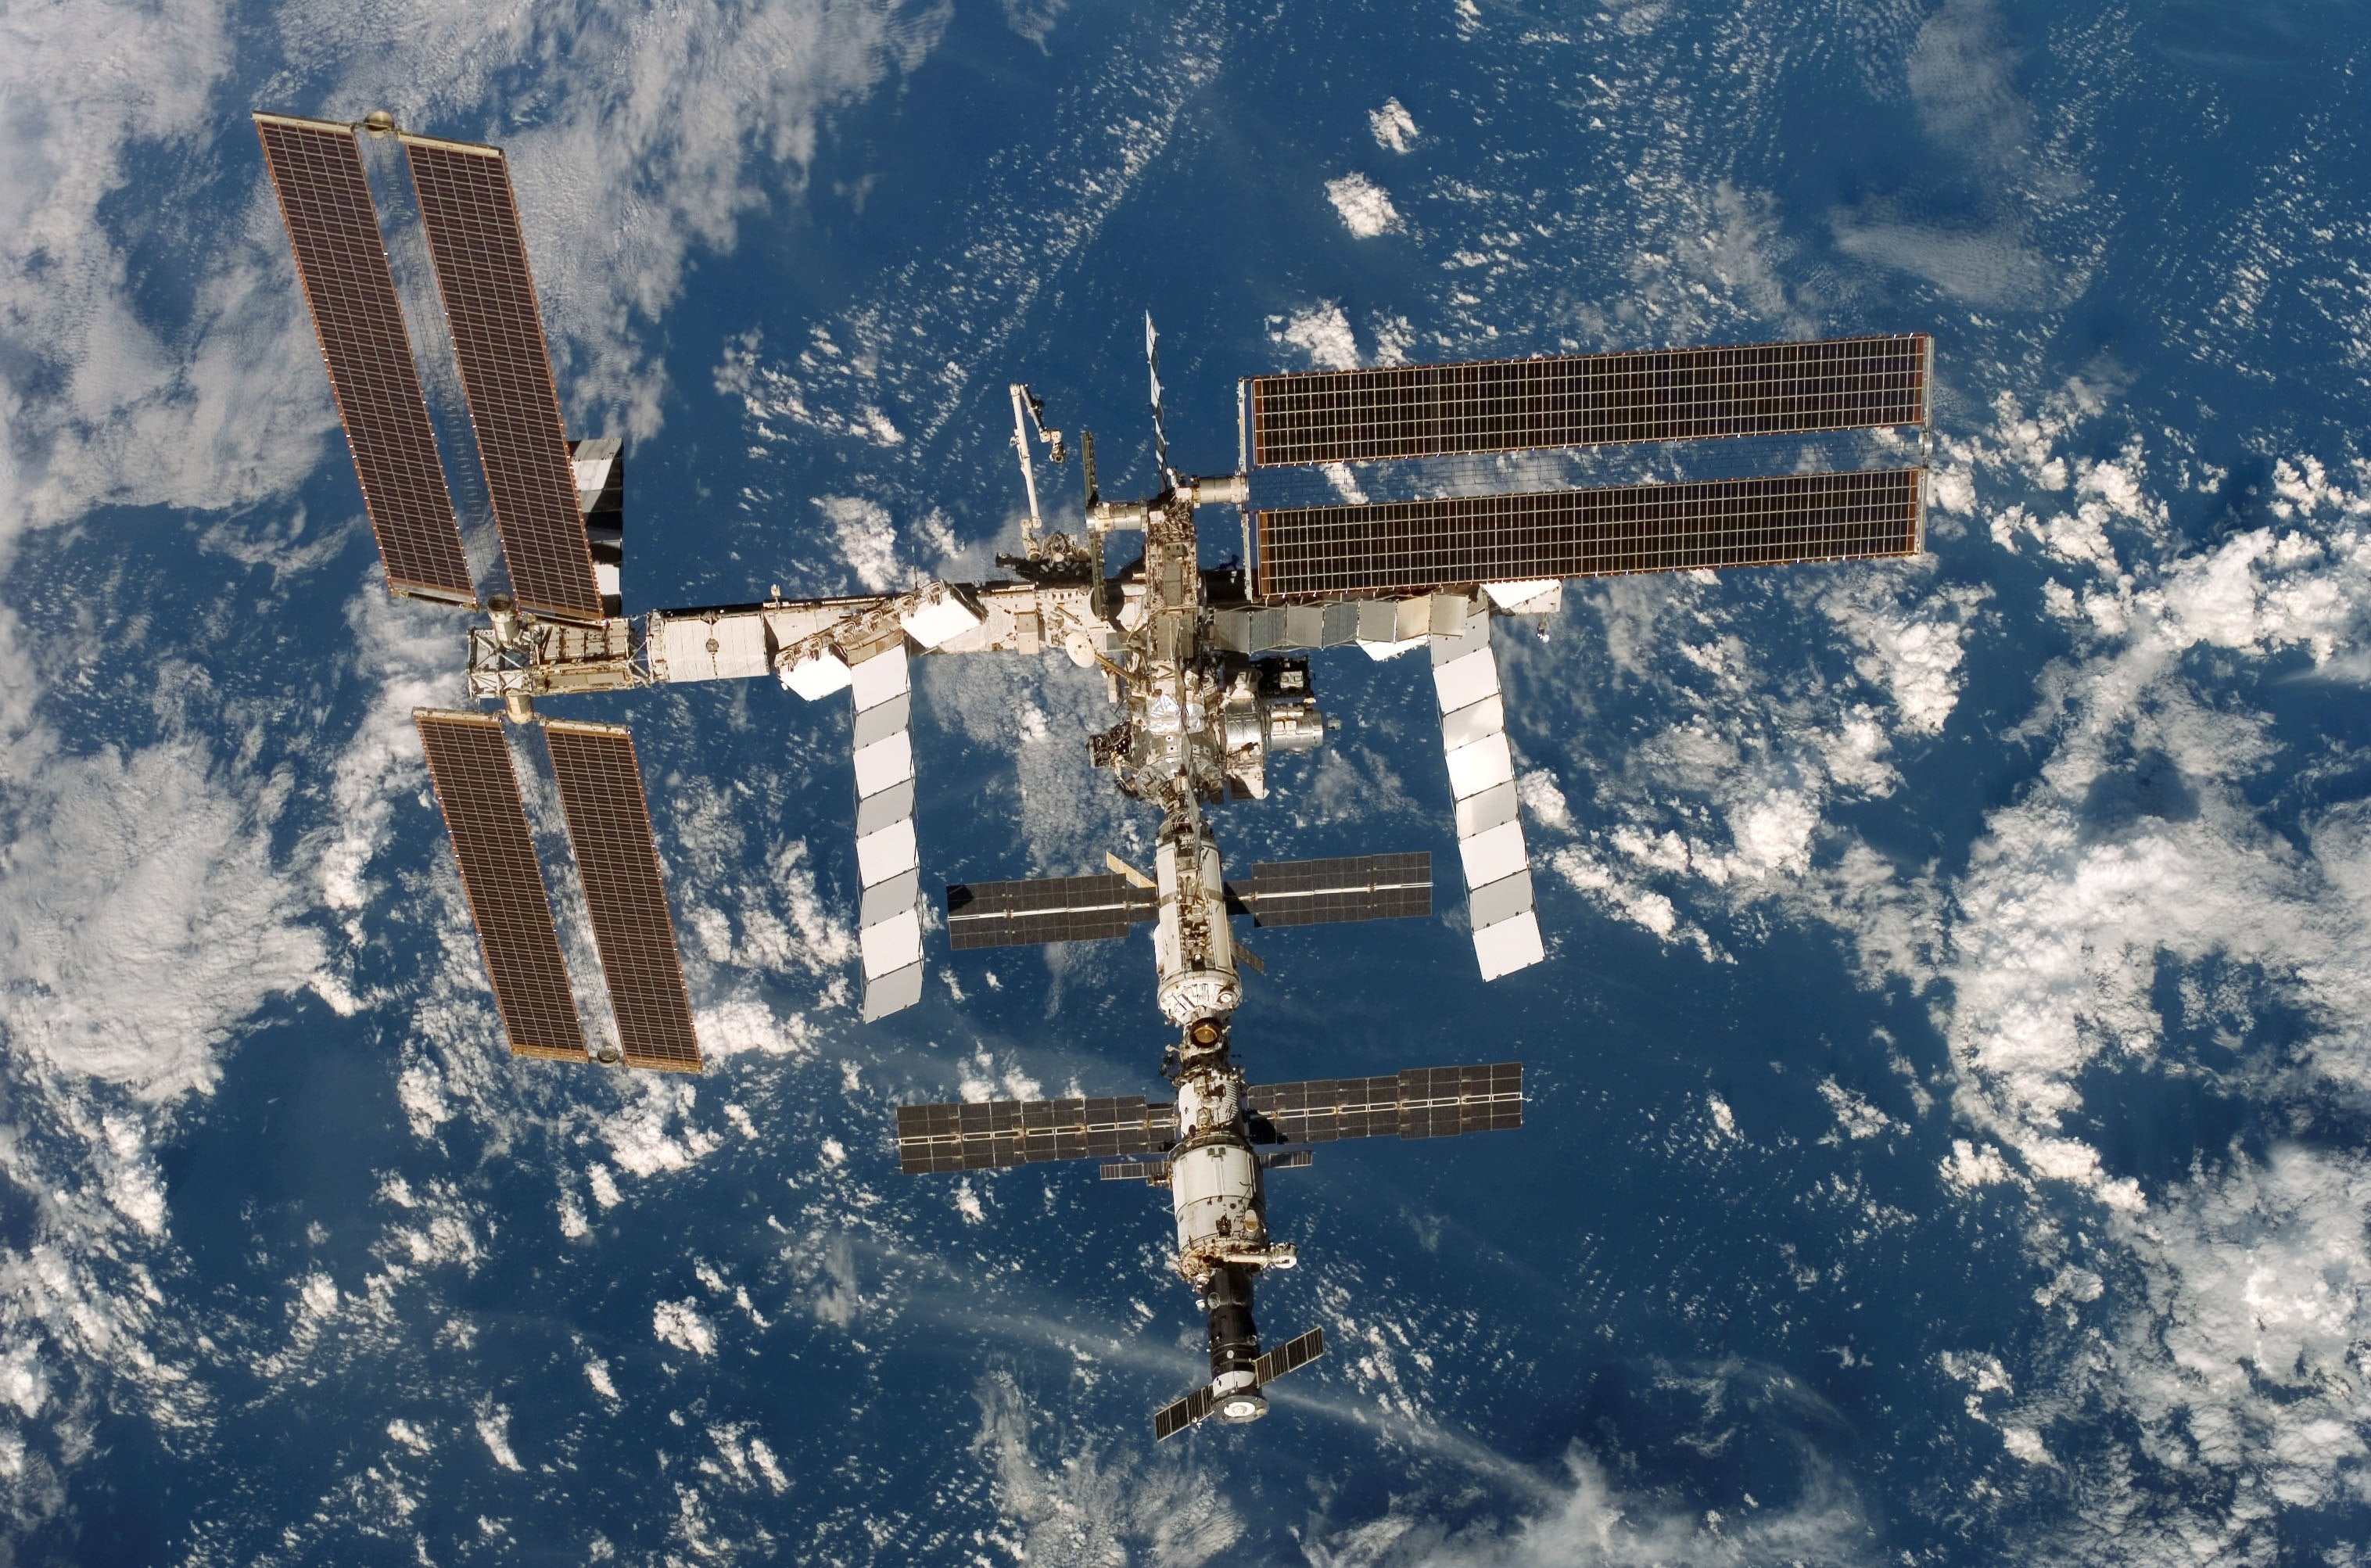 The ISS as seen from the Space Shuttle Discovery